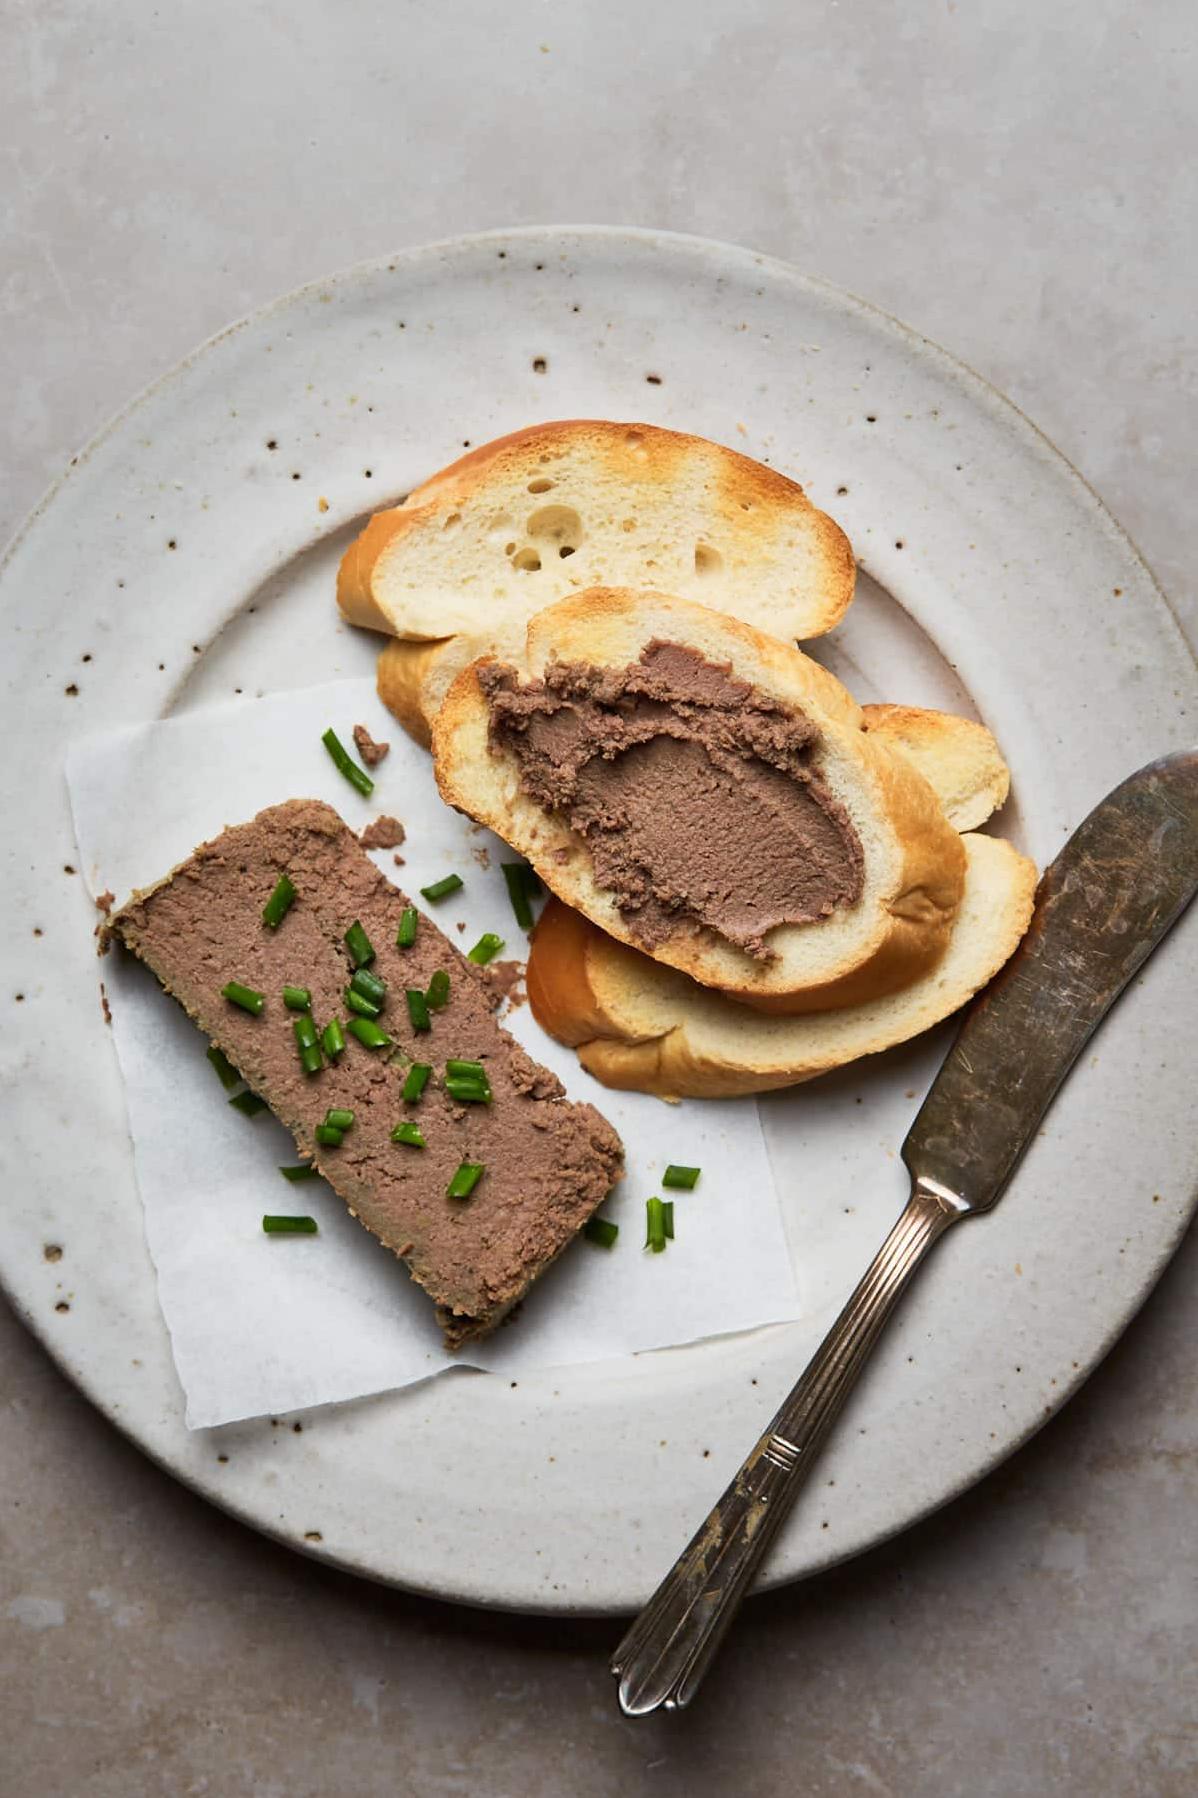  A rich, flavorful pate that hits all the right notes